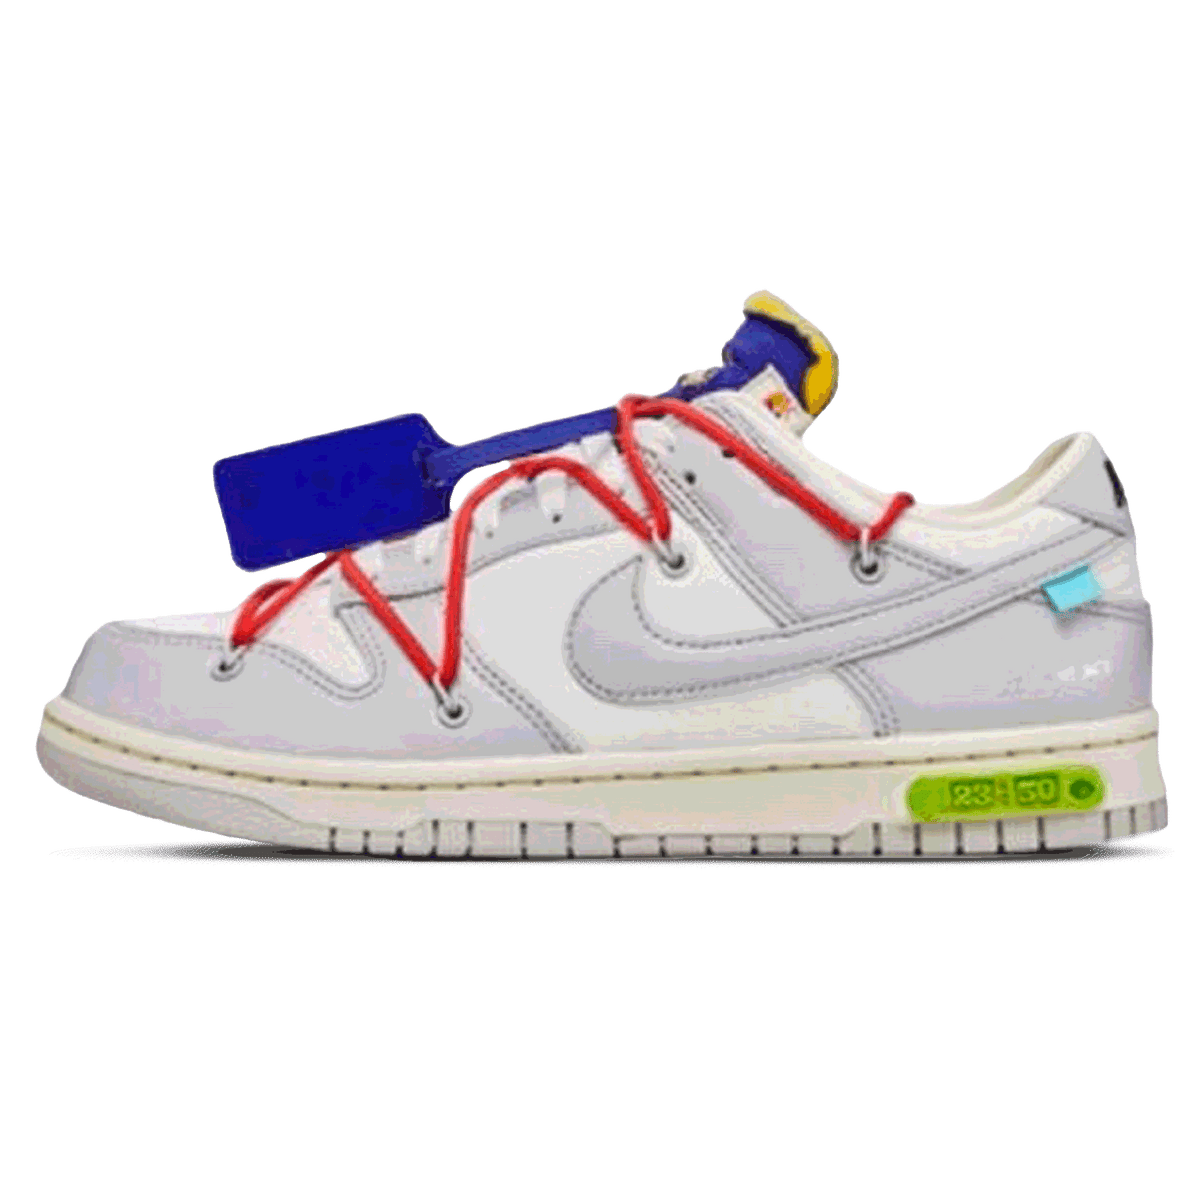 Off-White x Nike Dunk Low 'Lot 23 of 50' - Kick Game